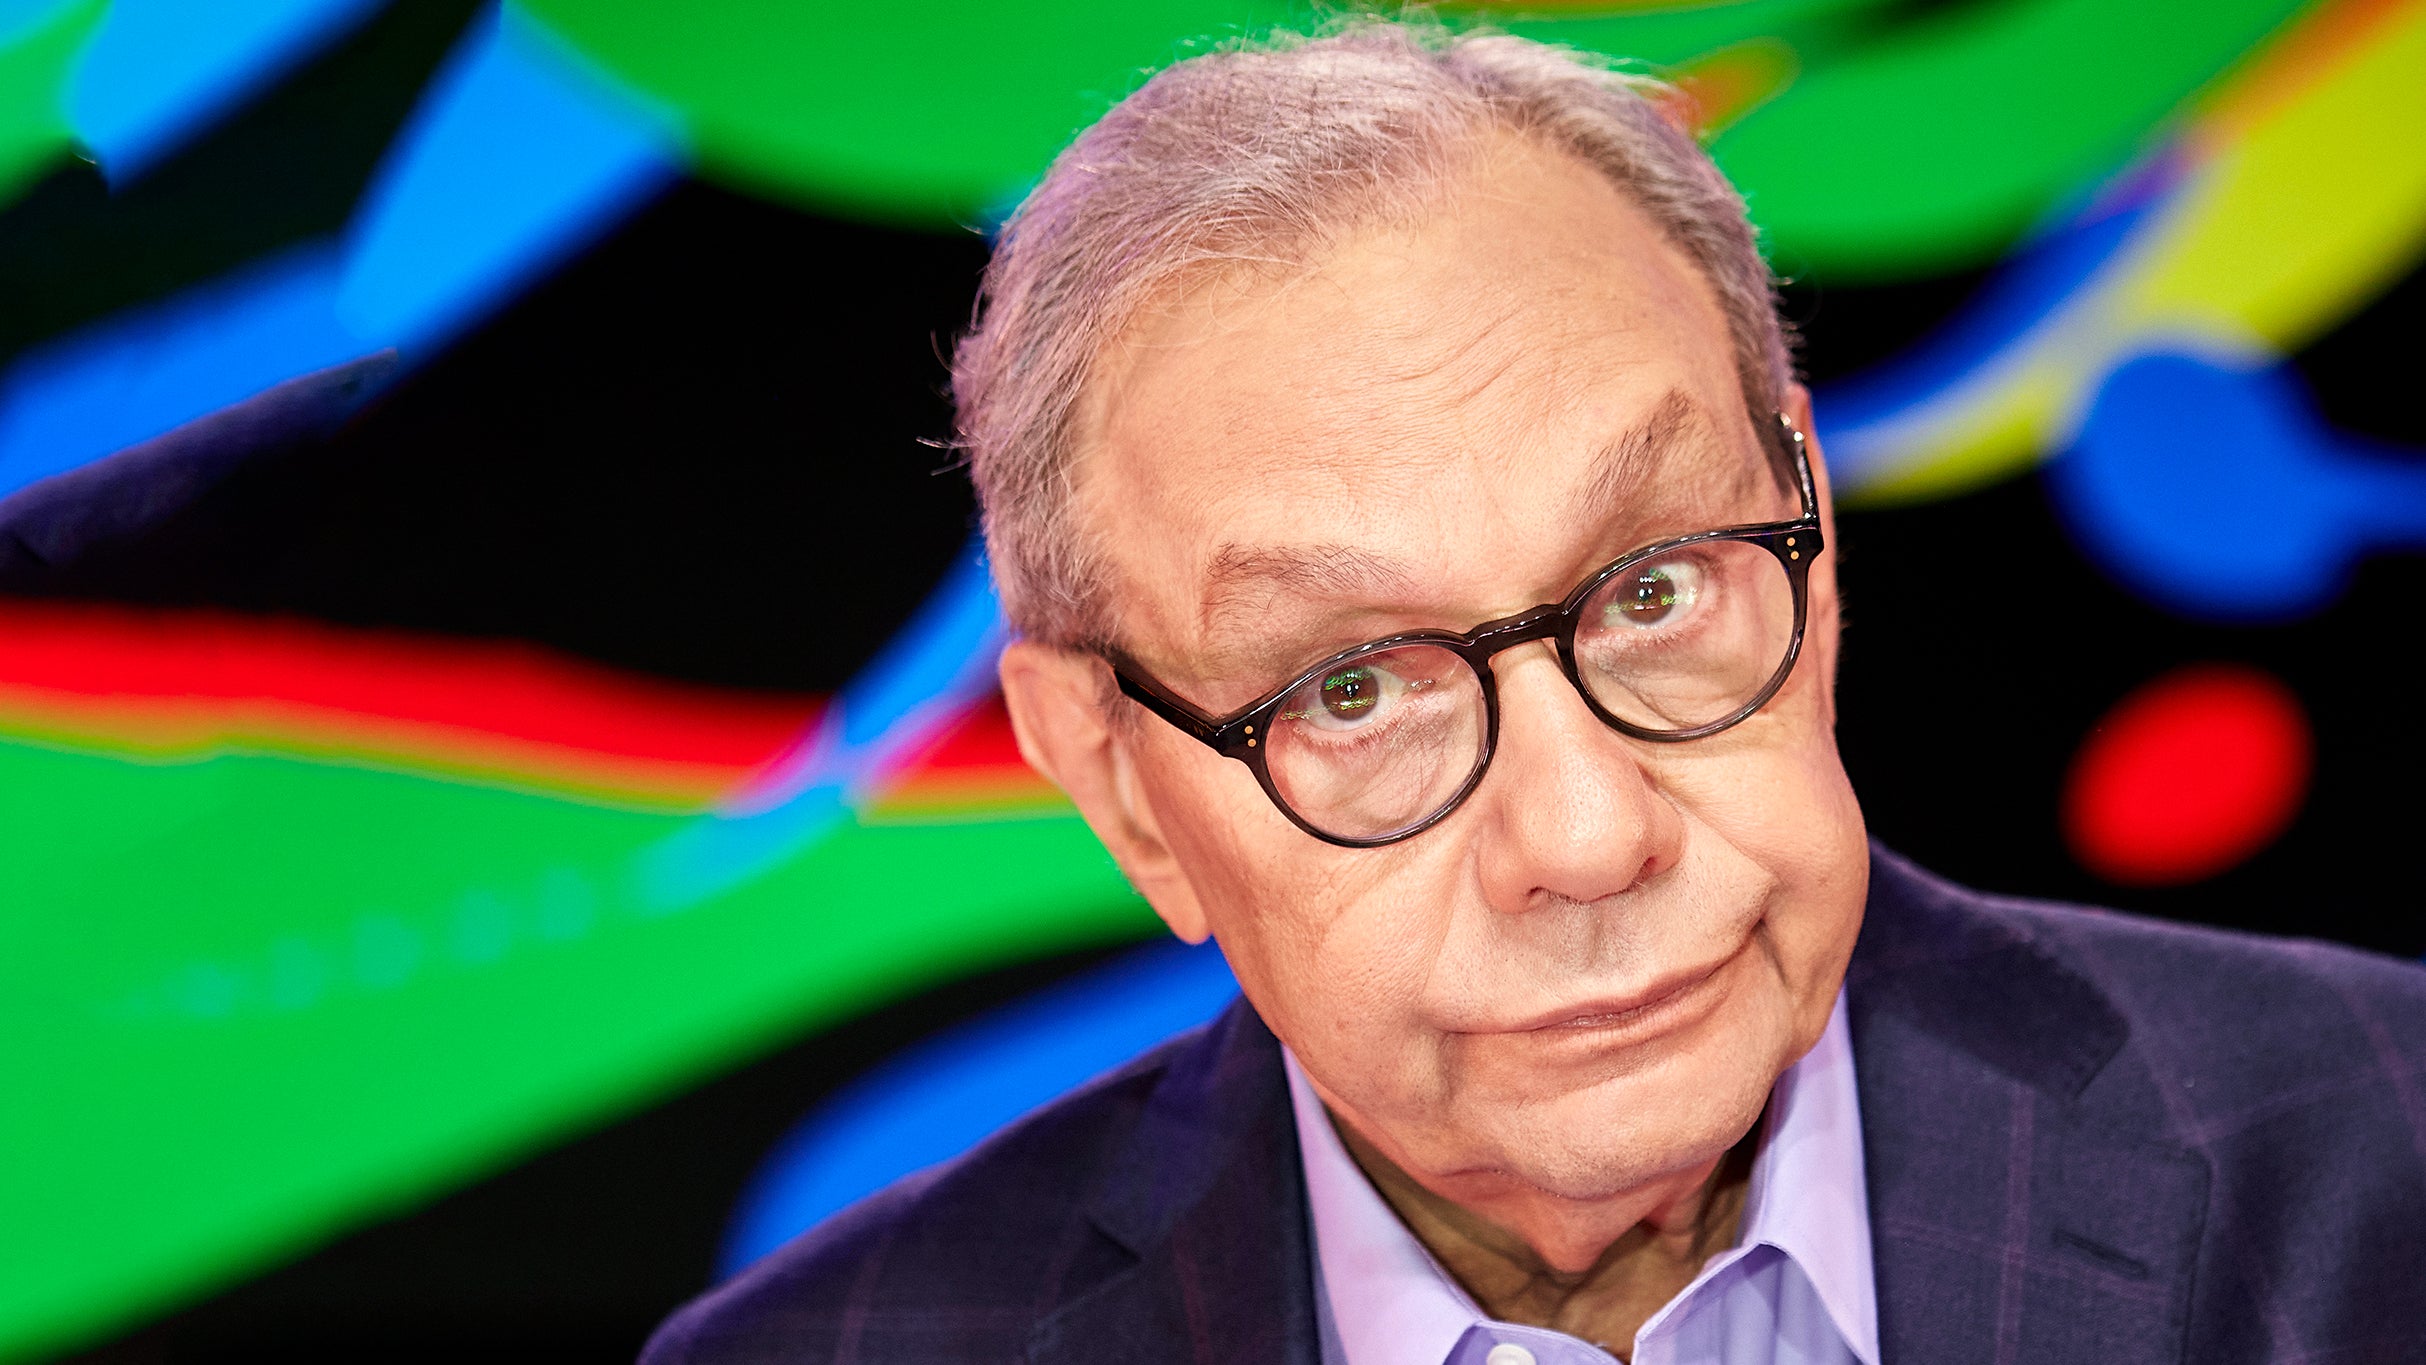 Lewis Black: Off The Rails in Kalamazoo promo photo for CEN Offer 20% Off presale offer code